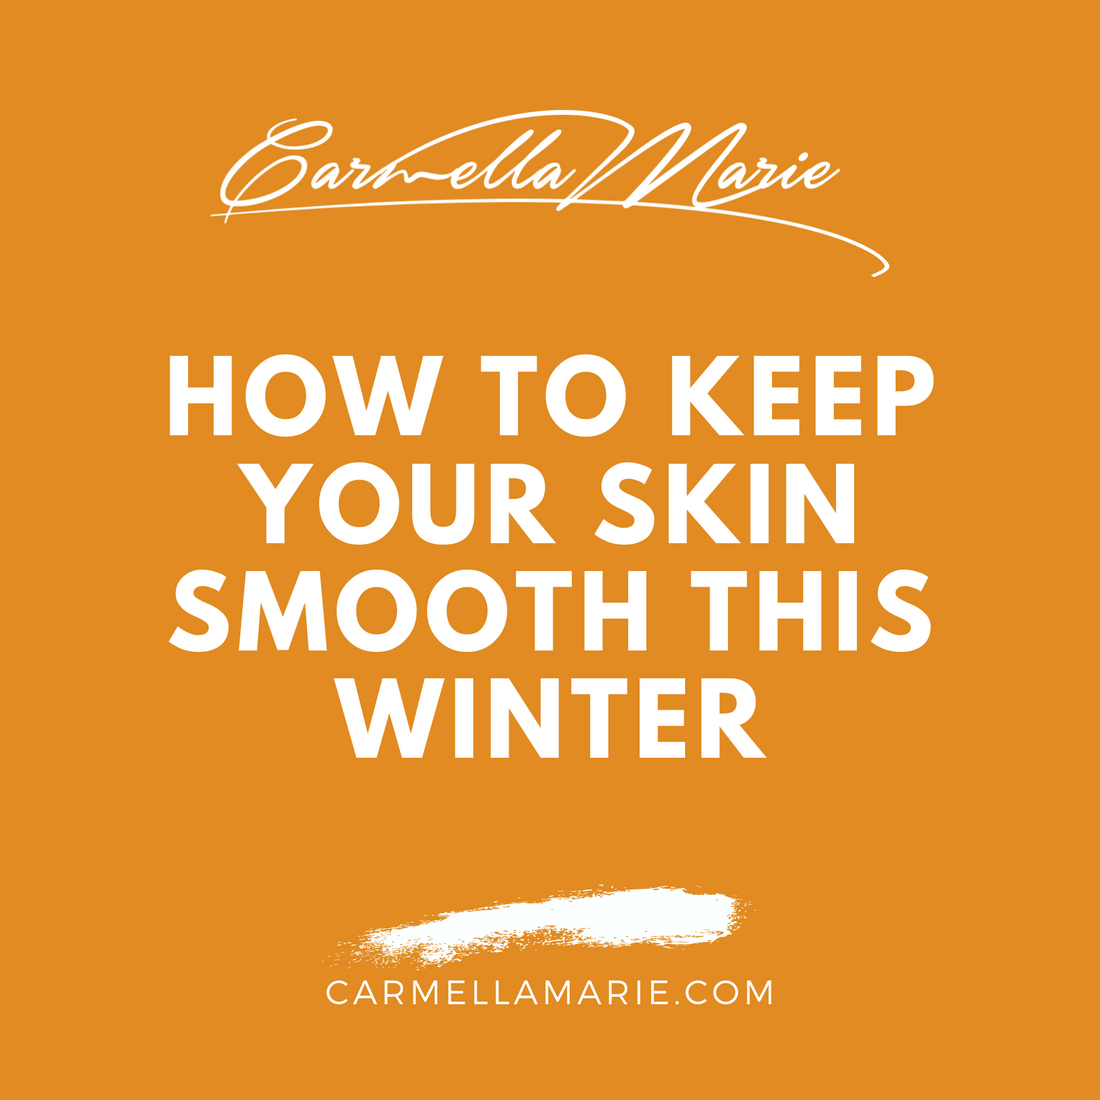 3 easy steps to get smooth skin